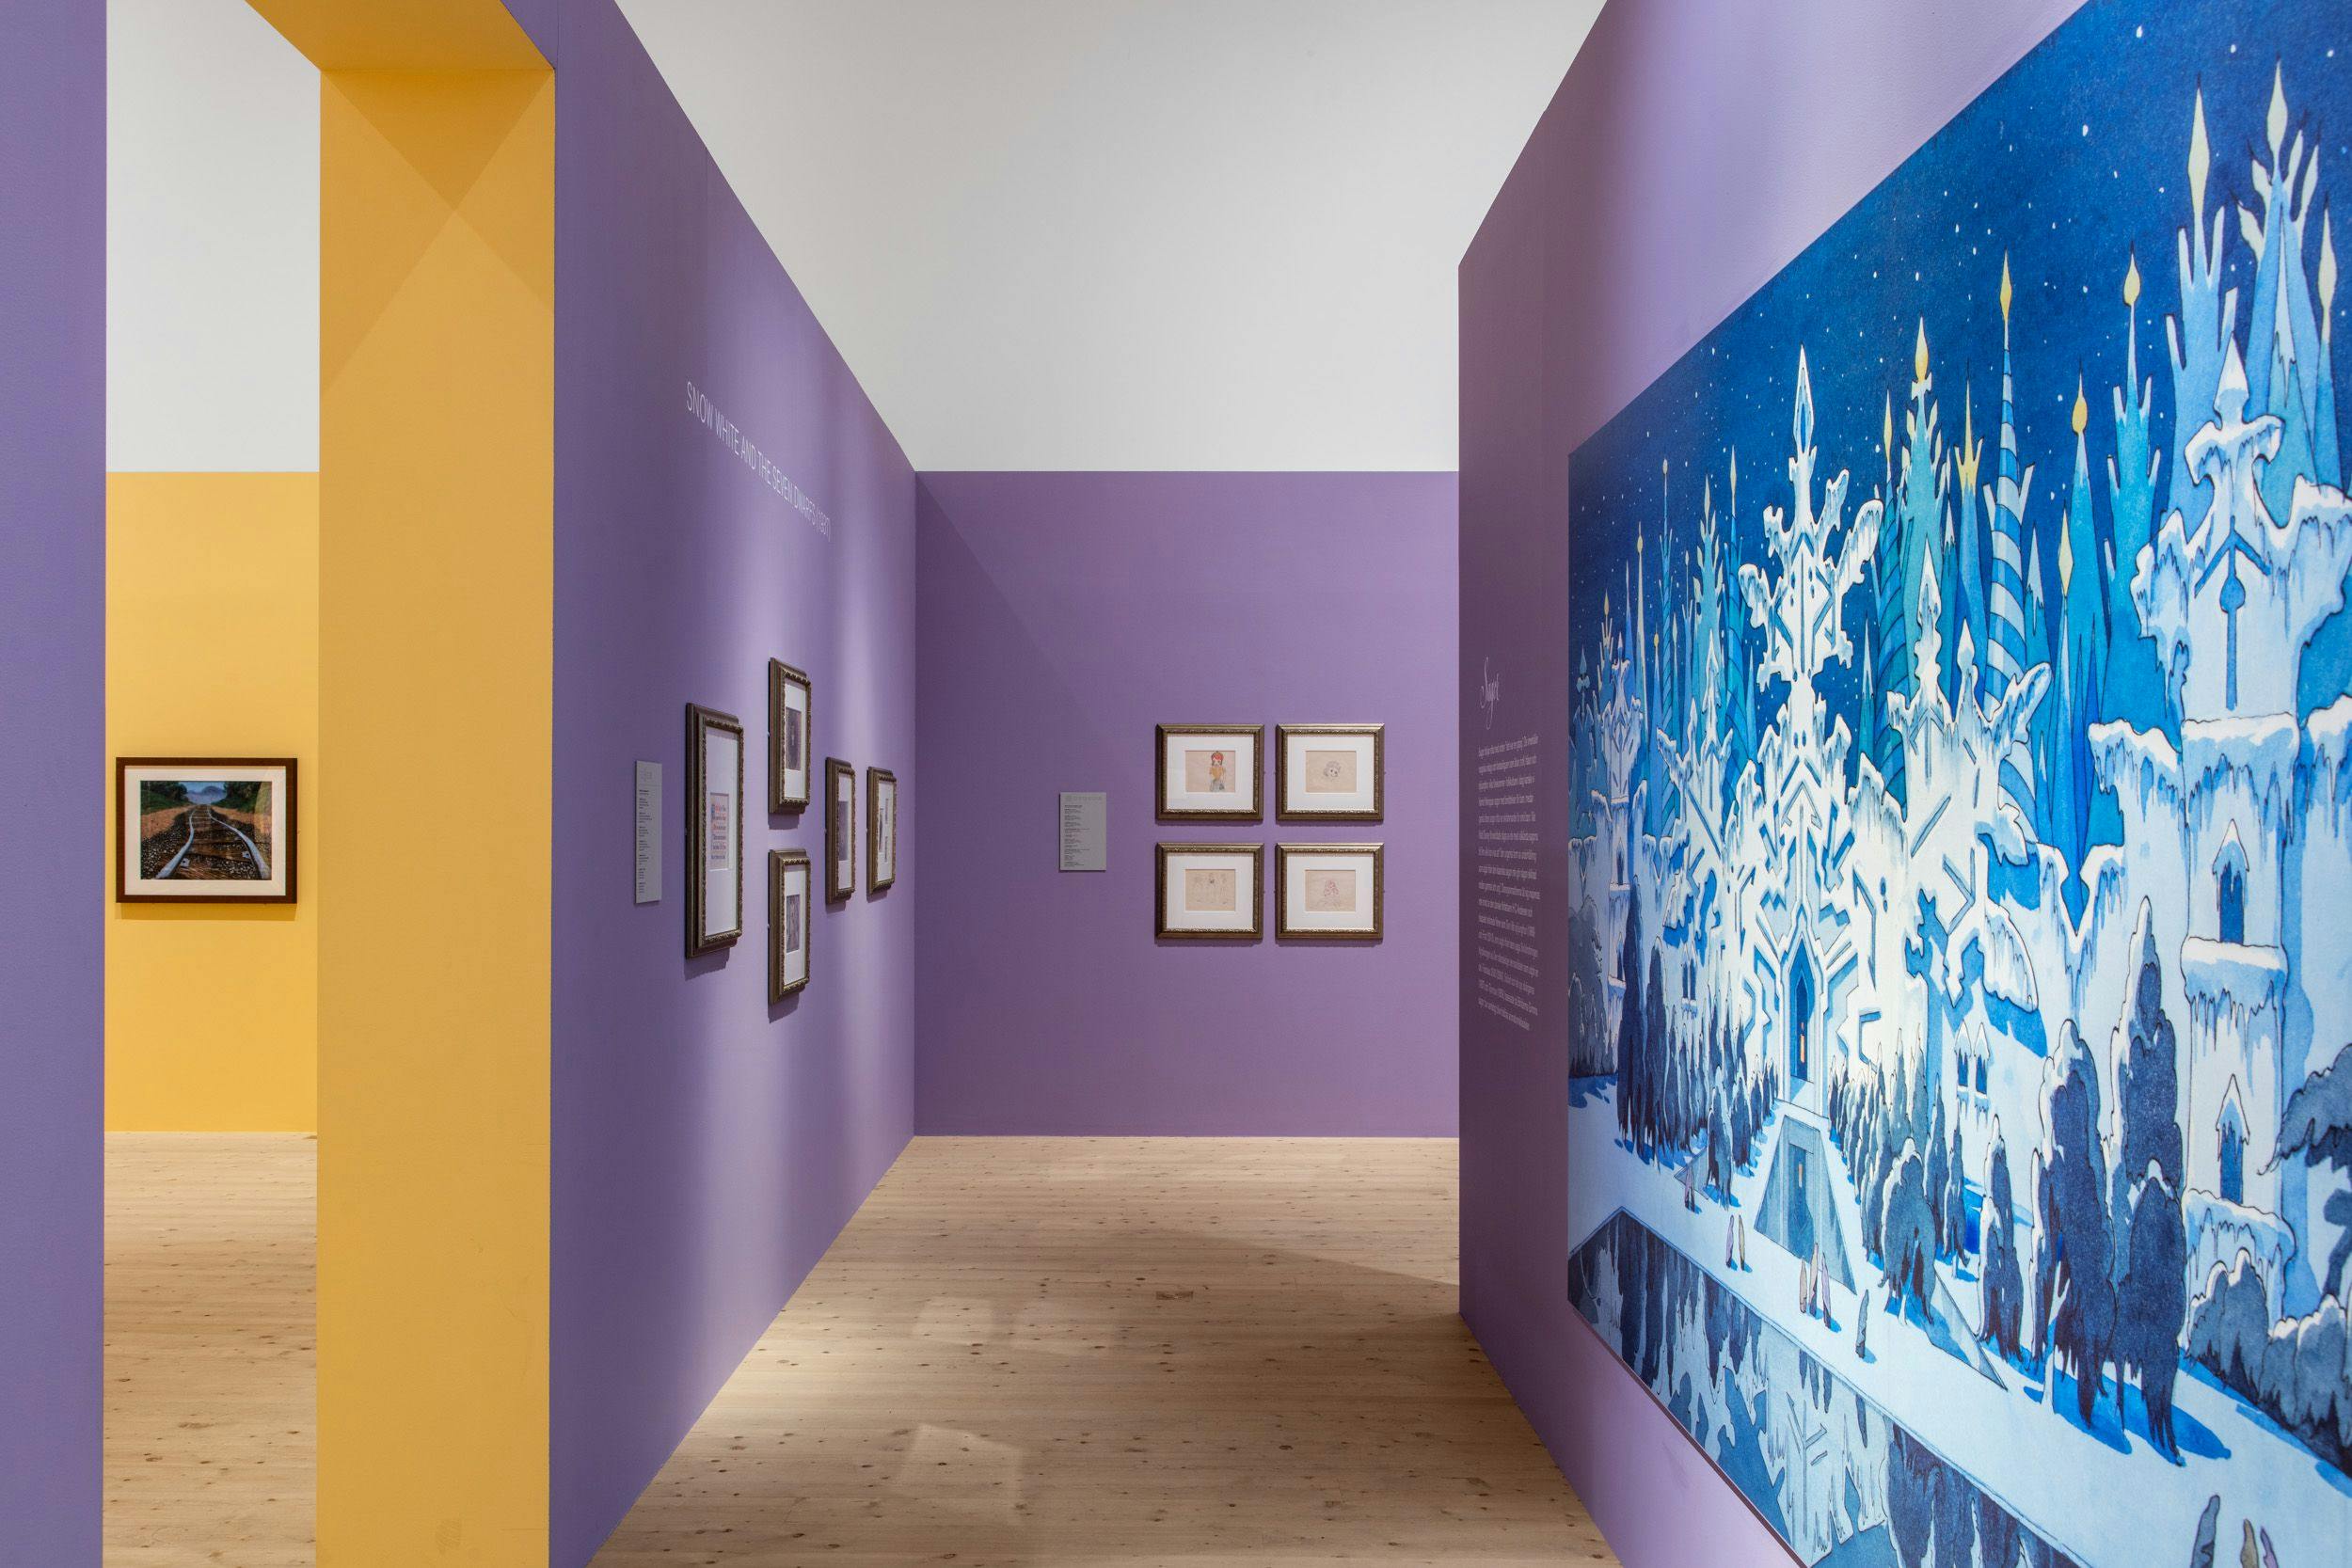 Yellow and purple walls, in the foreground large reproduction of concept sketch from Frozen